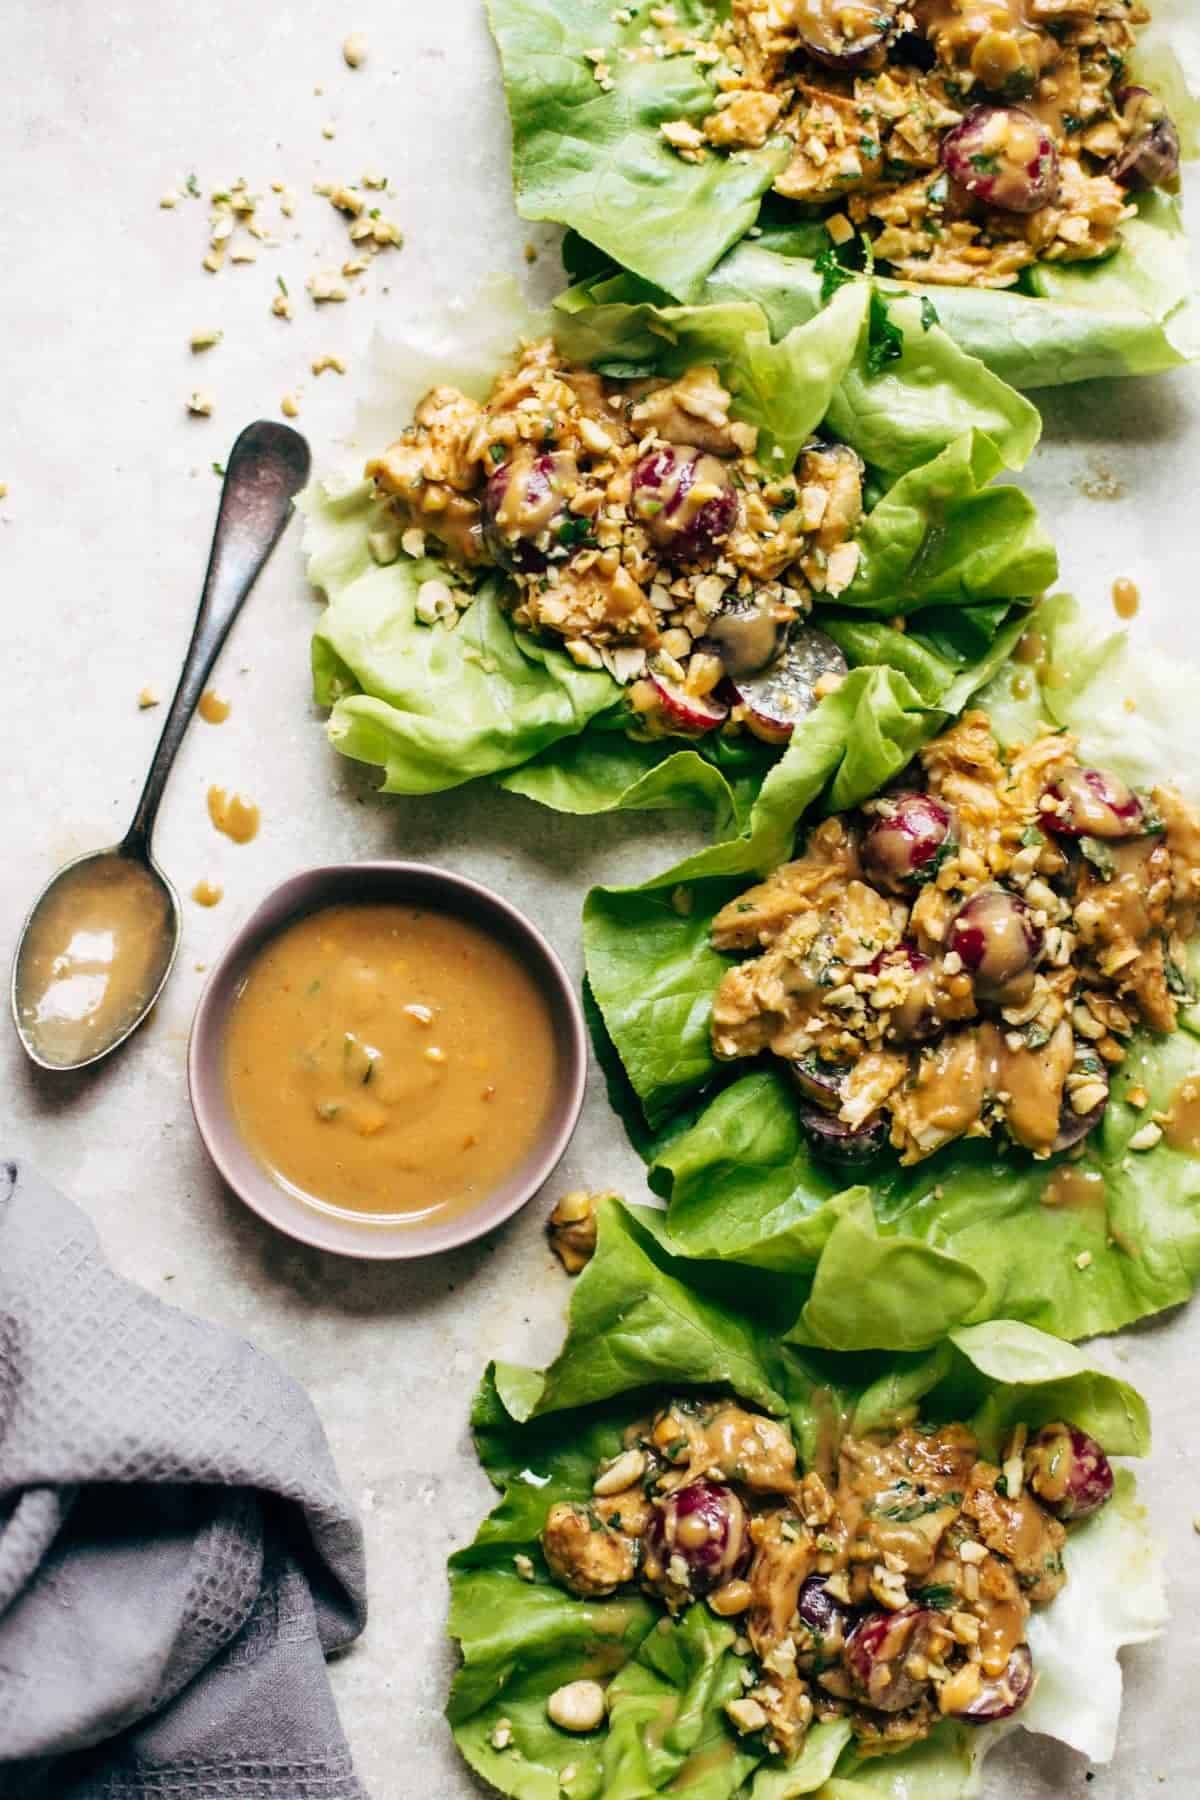 Creamy Miso Peanut Chicken Lettuce Wraps - grilled chicken and juicy grapes tossed with a simple creamy miso-peanut sauce. Super easy and healthy recipe! | pinchofyum.com